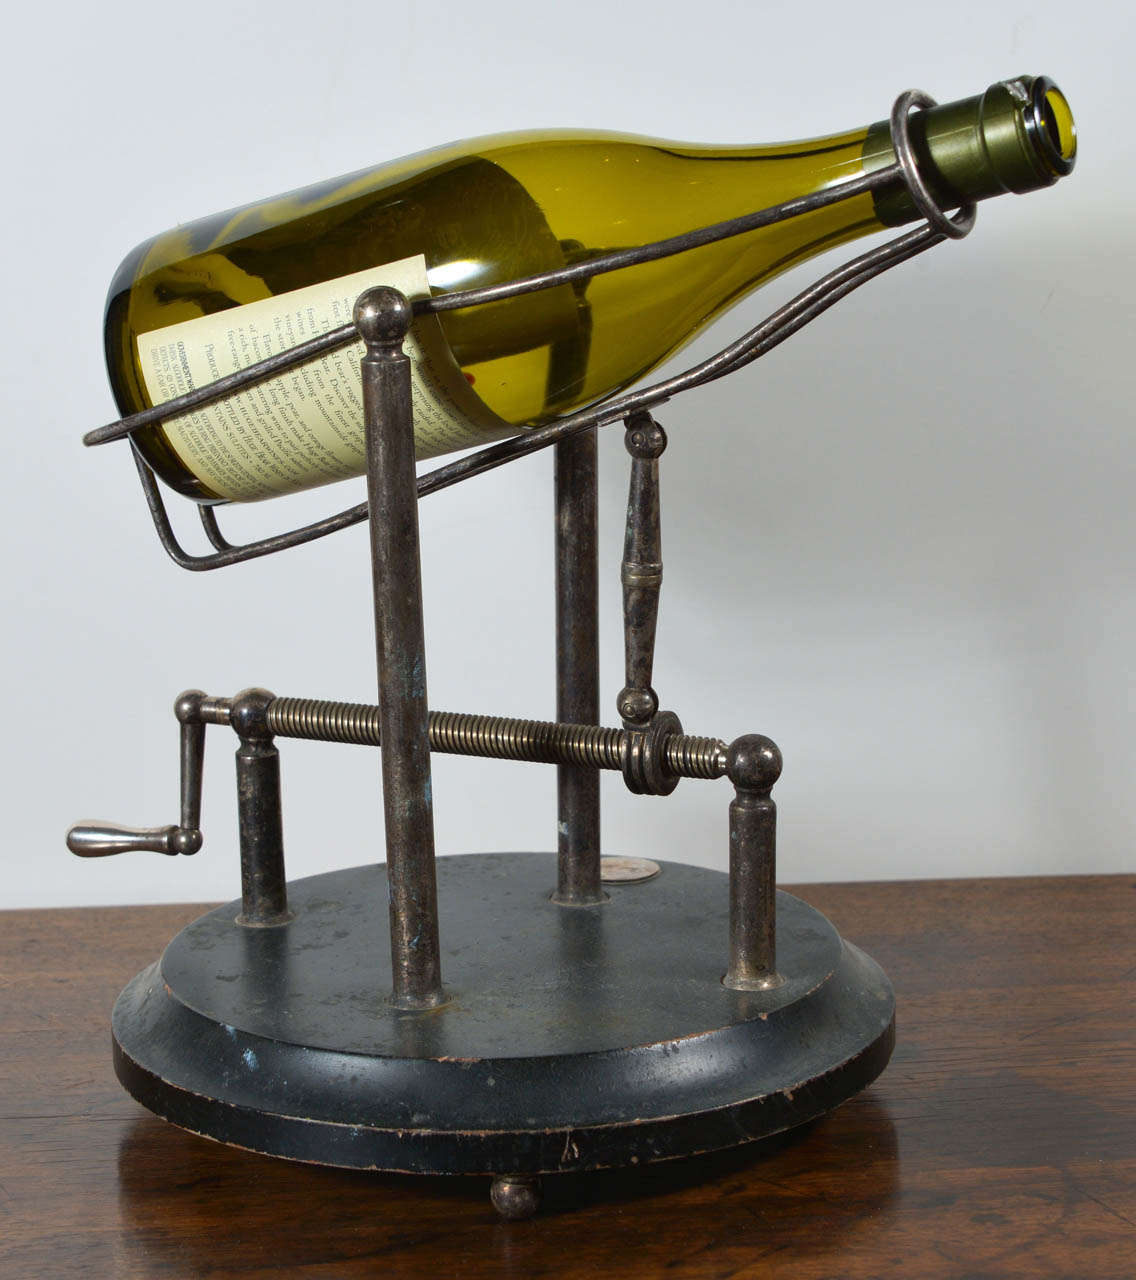 French Wine Decanter to mechanically control the pouring of the wine so that the sediment remains on the bottom of the bottle and doesn't fall into the wine glass.